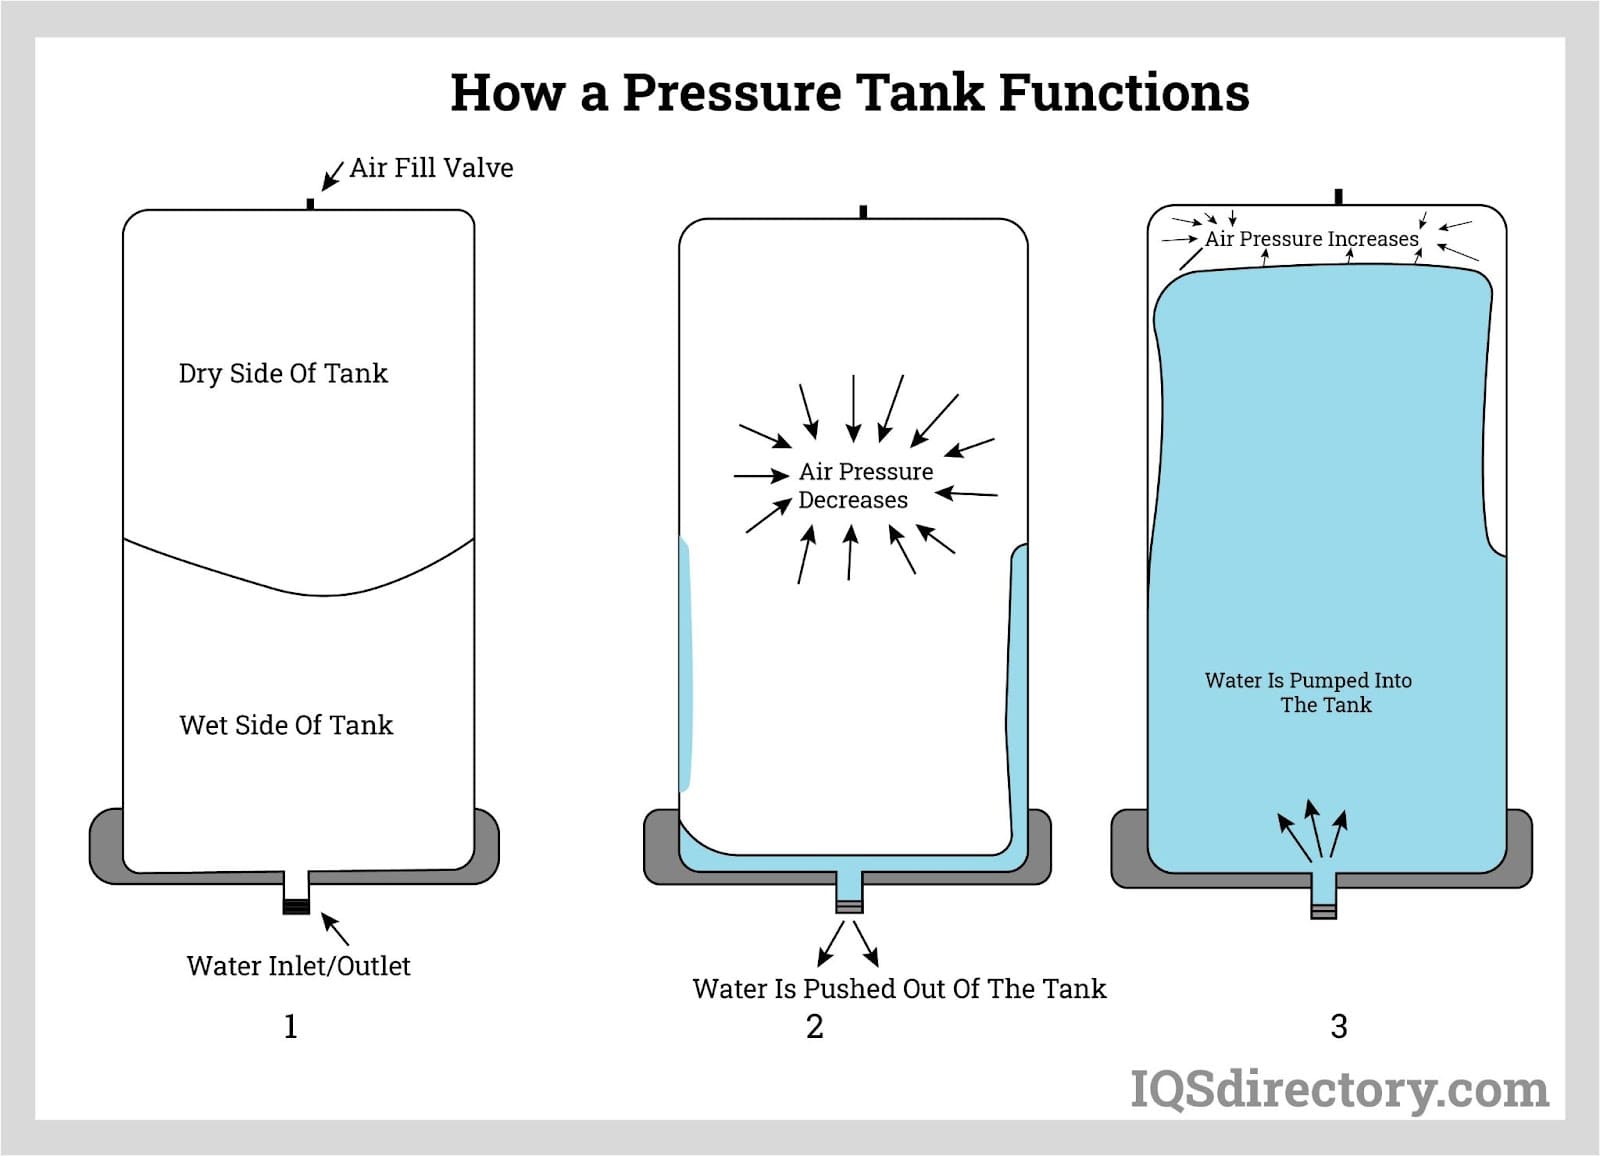 How a Pressure Tank Functions